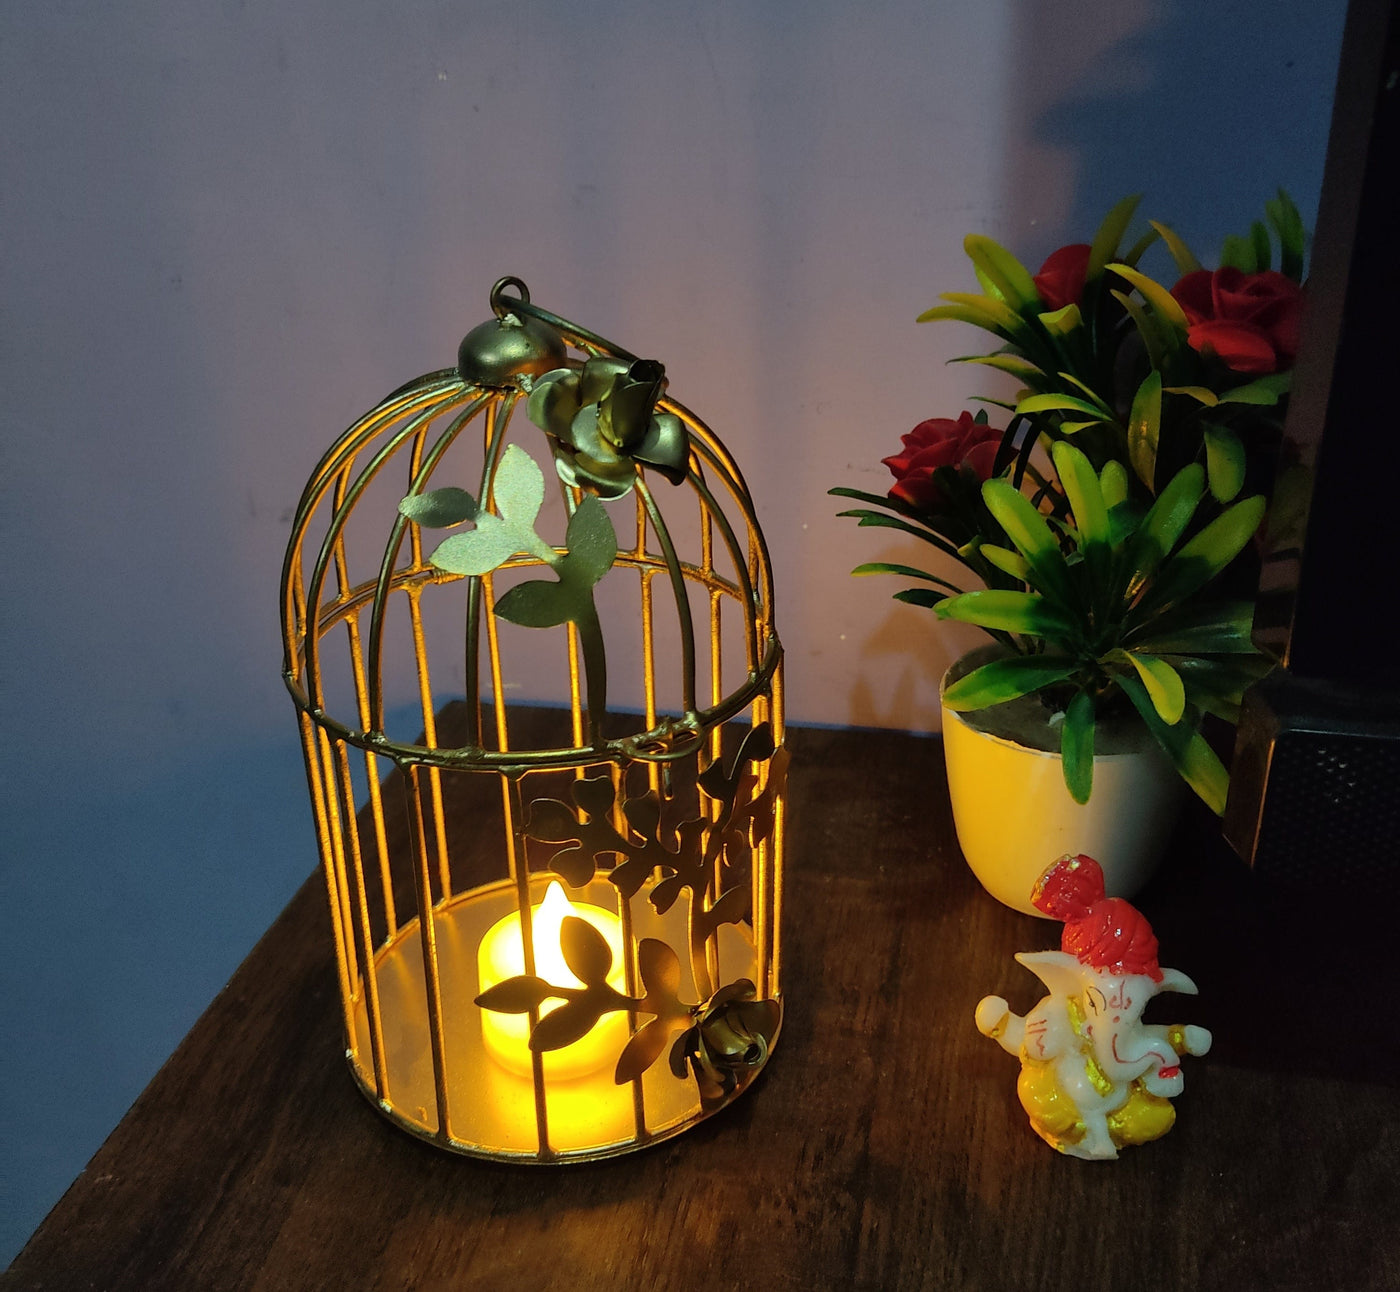 Lamansh cage candle holder Bulk Pack of 50 pcs Butterfly Iron Metal Cage Candle Holder for Festive ✨ Home & Event Decoration / Floral 🌺 work Metal Handcrafted Diya Stand for Xmas 🎄 & Diwali decor